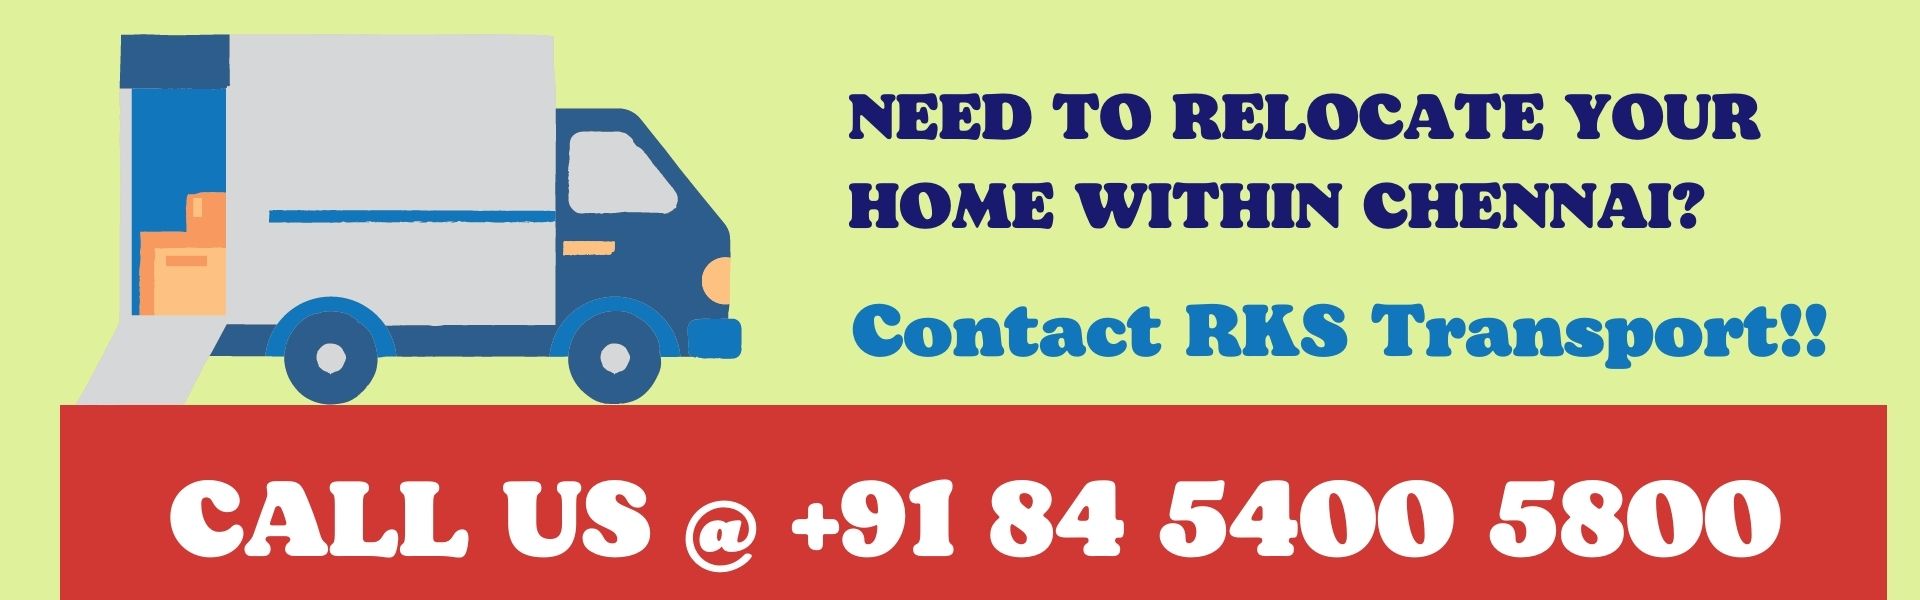 Local Home Shifting services in chennai - banner